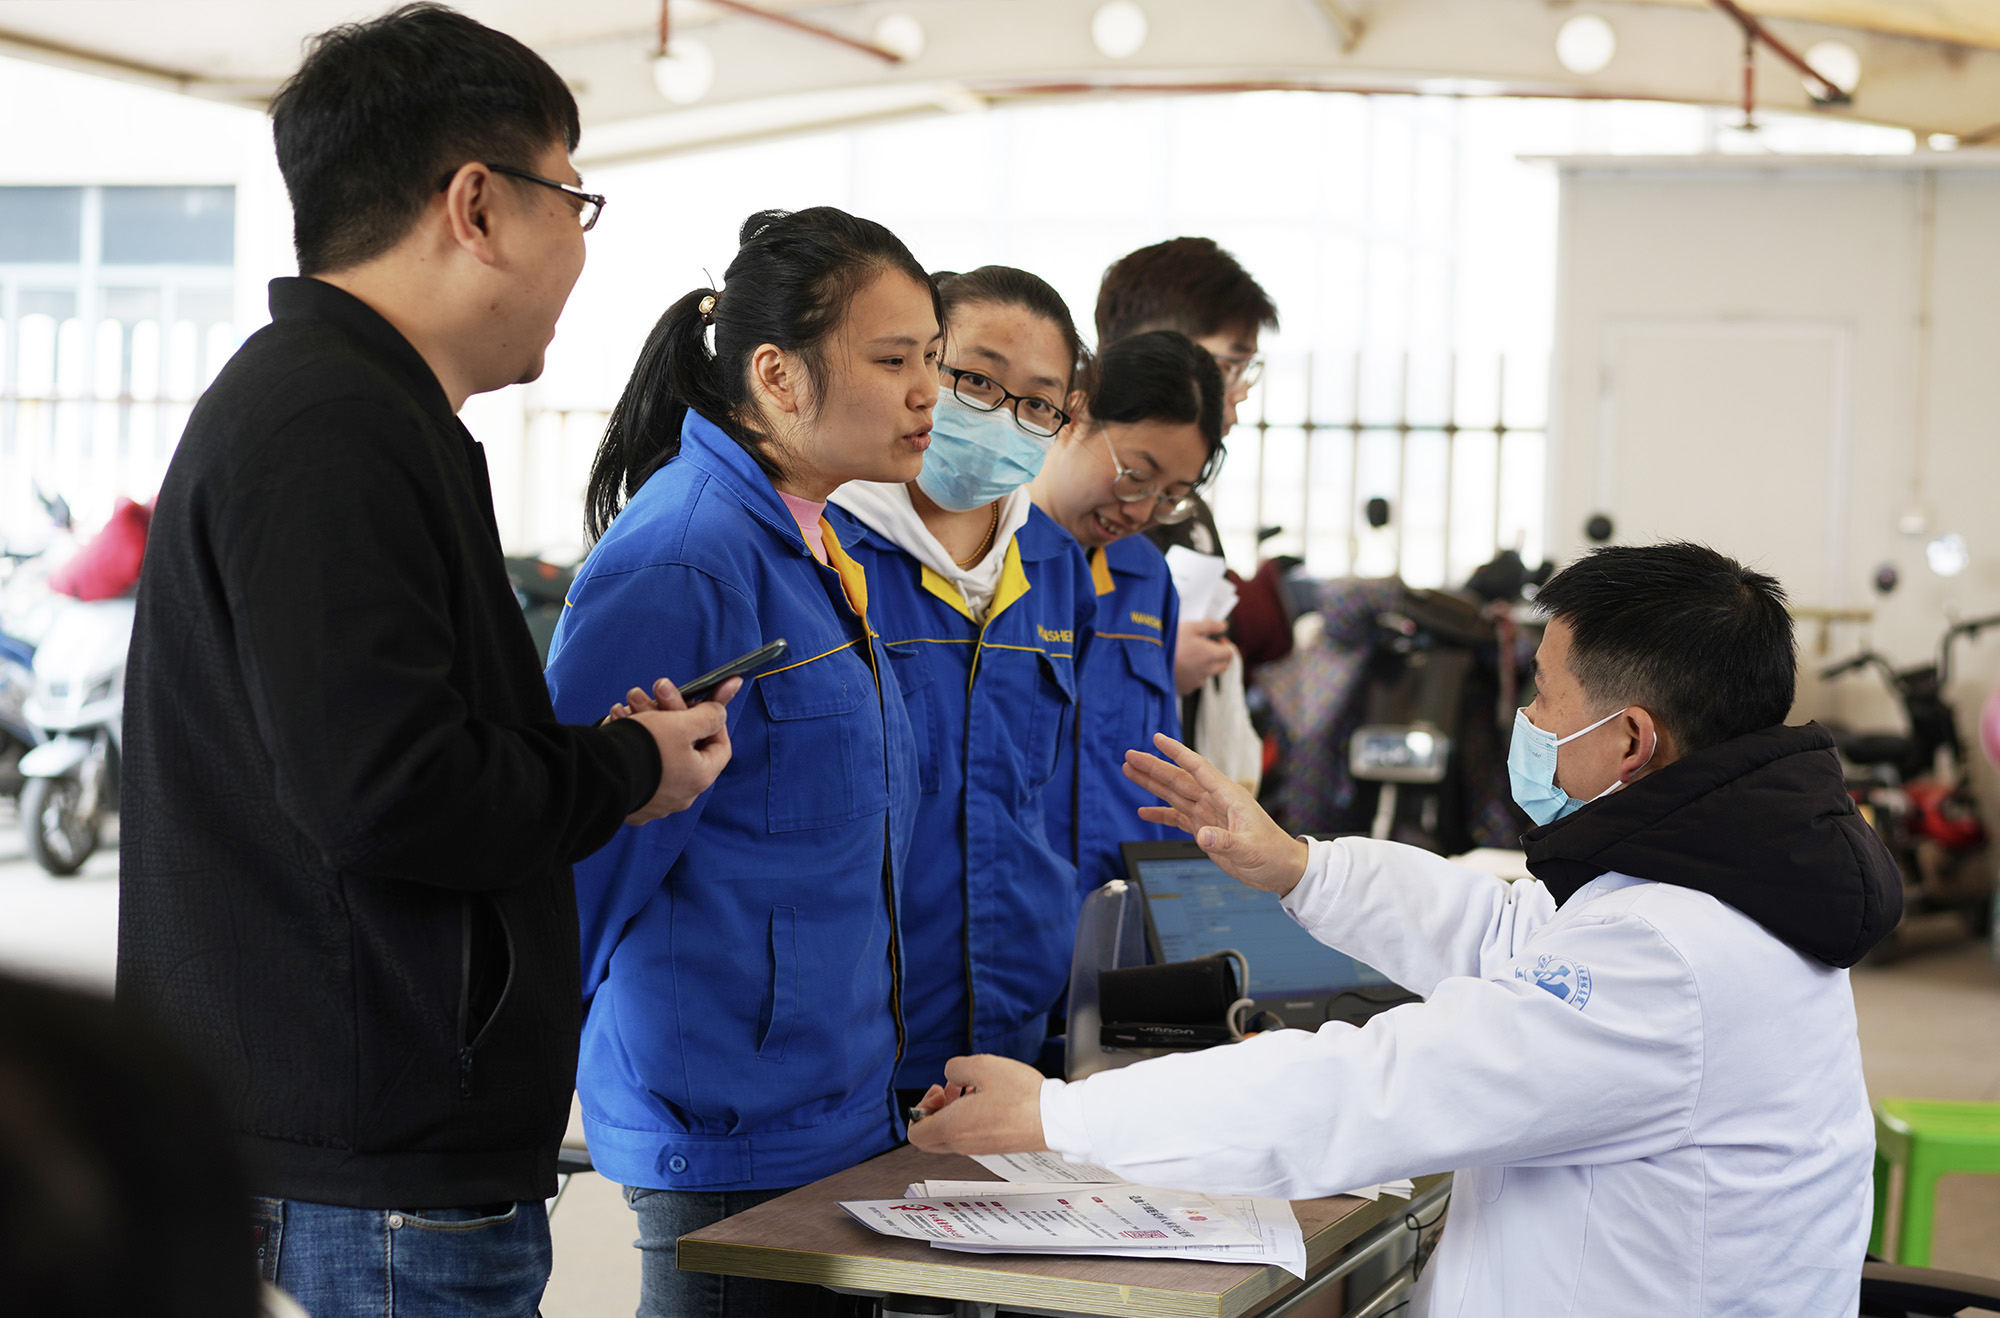 Voluntary Blood Donation | Passionate Wansheng Employees "Give a Hand for Love"